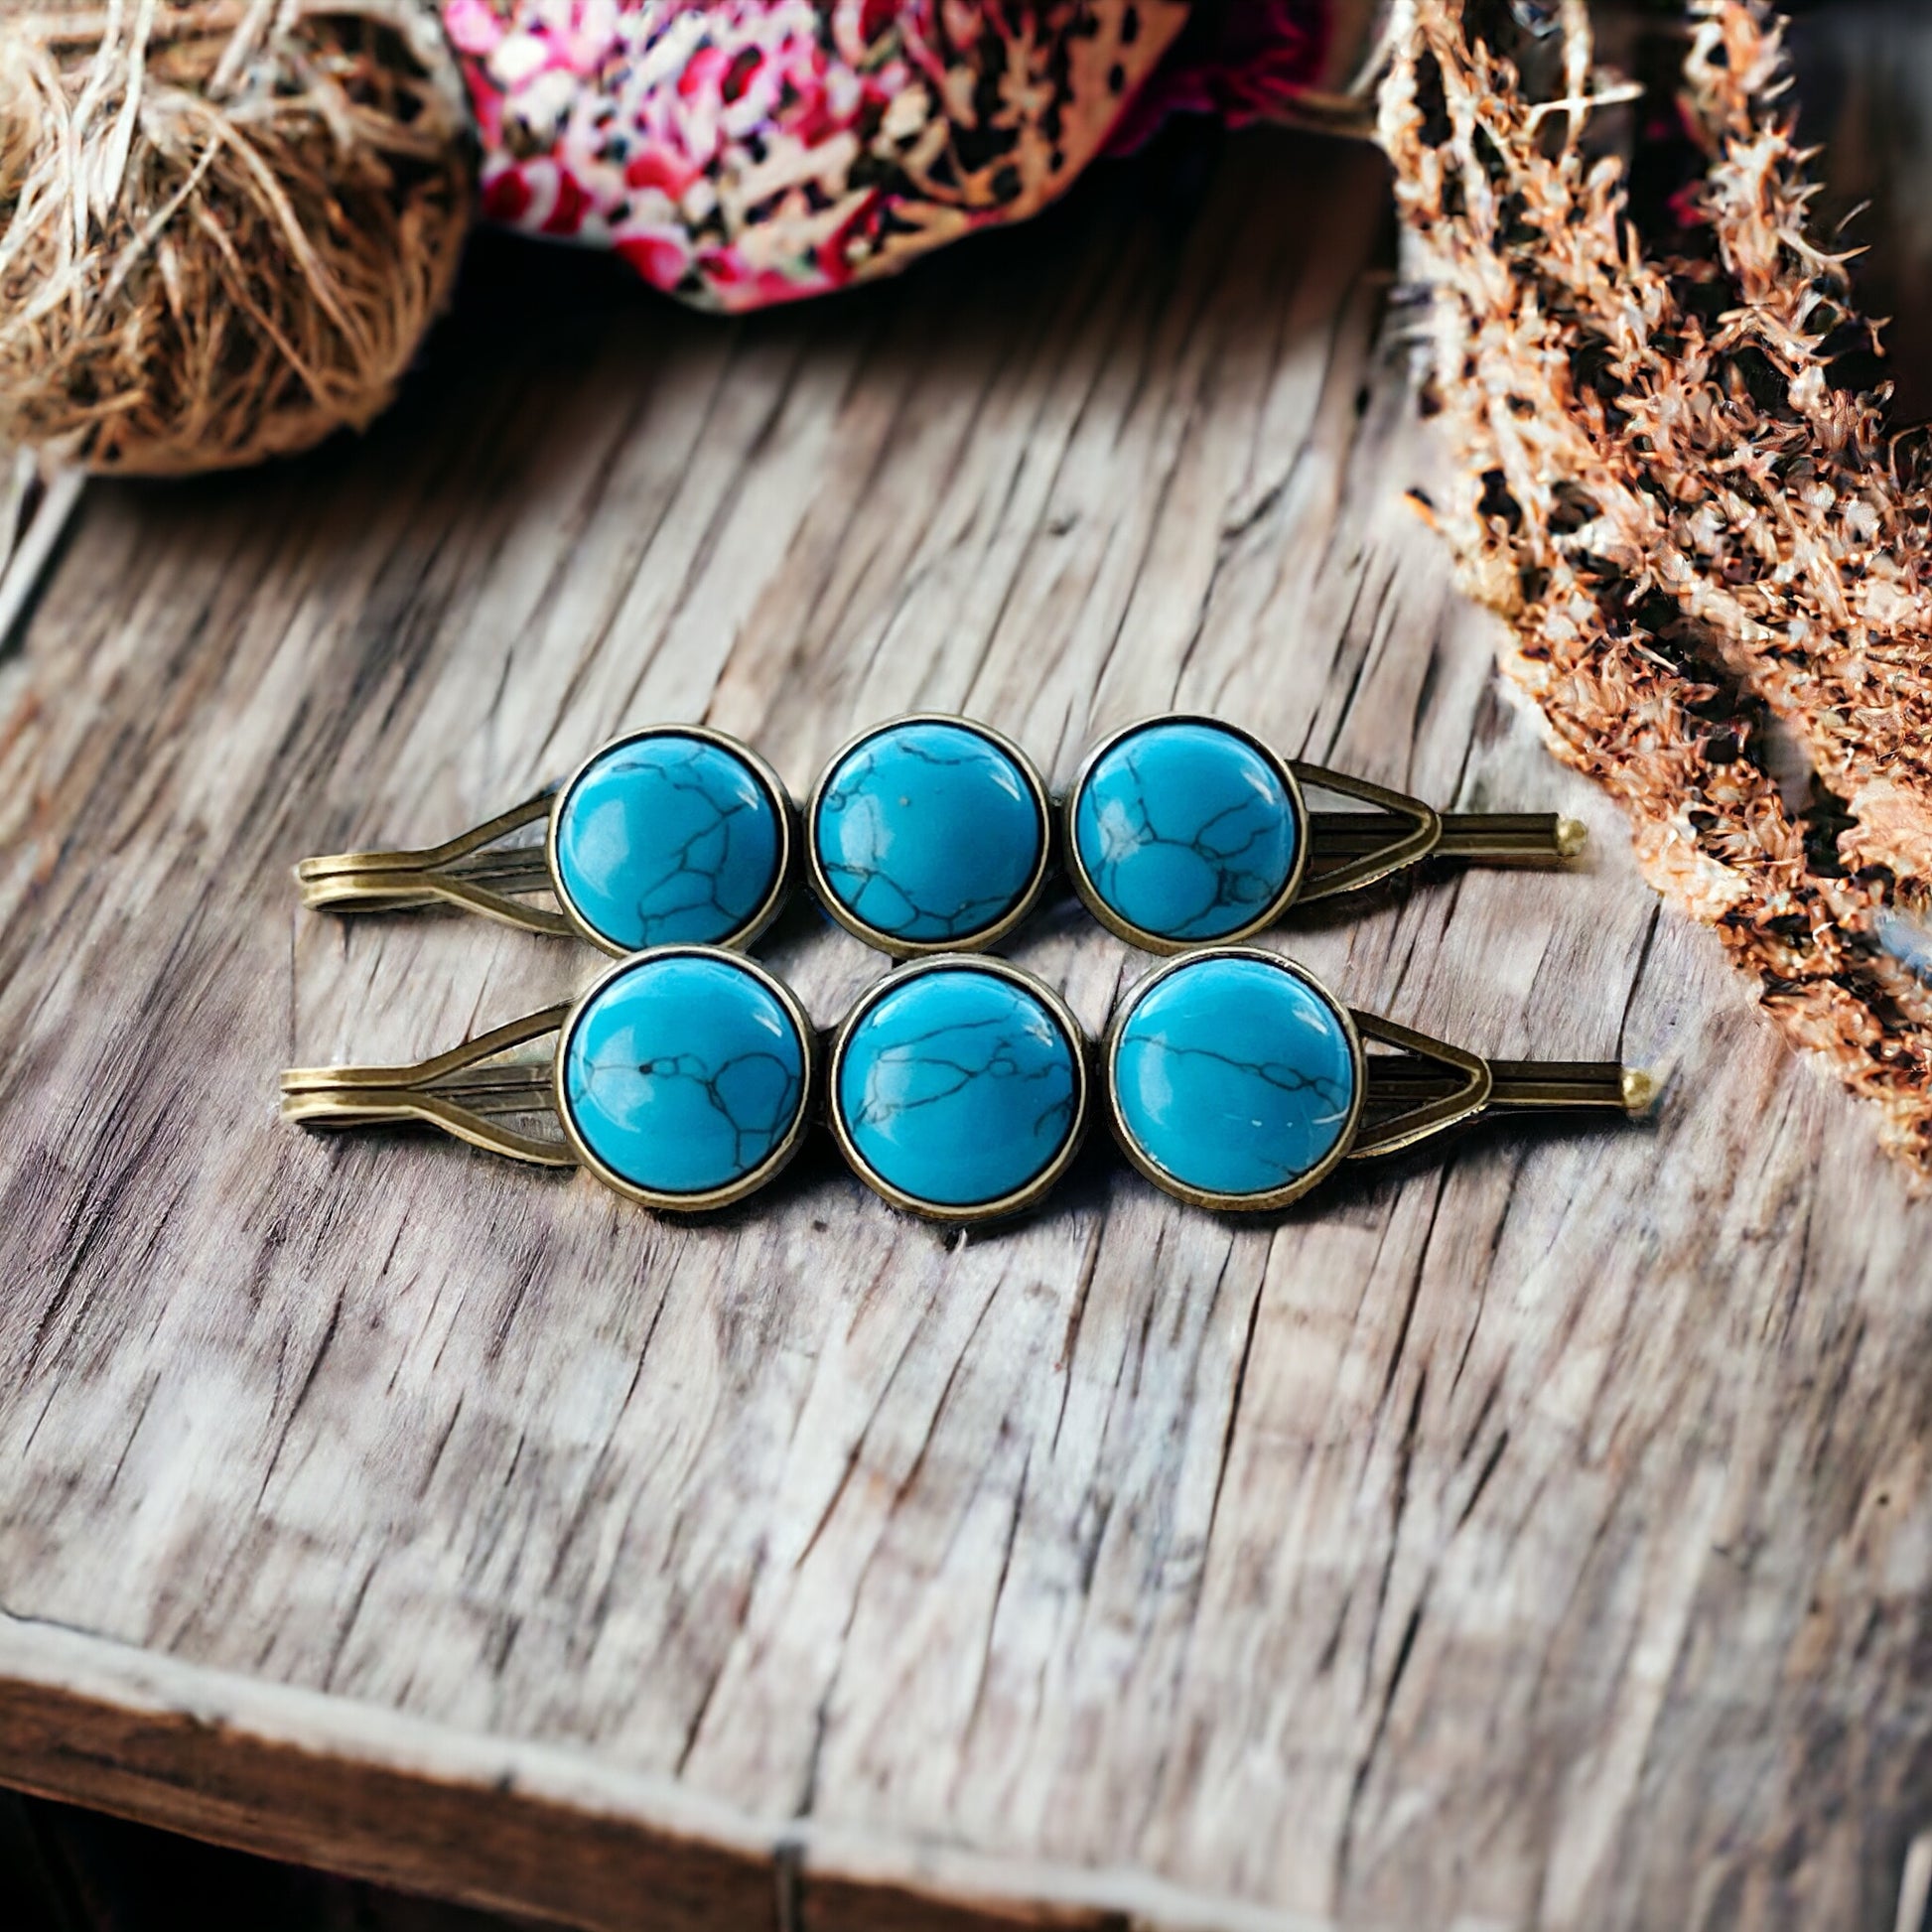 Blue Stone Hair Pins - Western, Boho, & Country-Inspired Hair Accessories